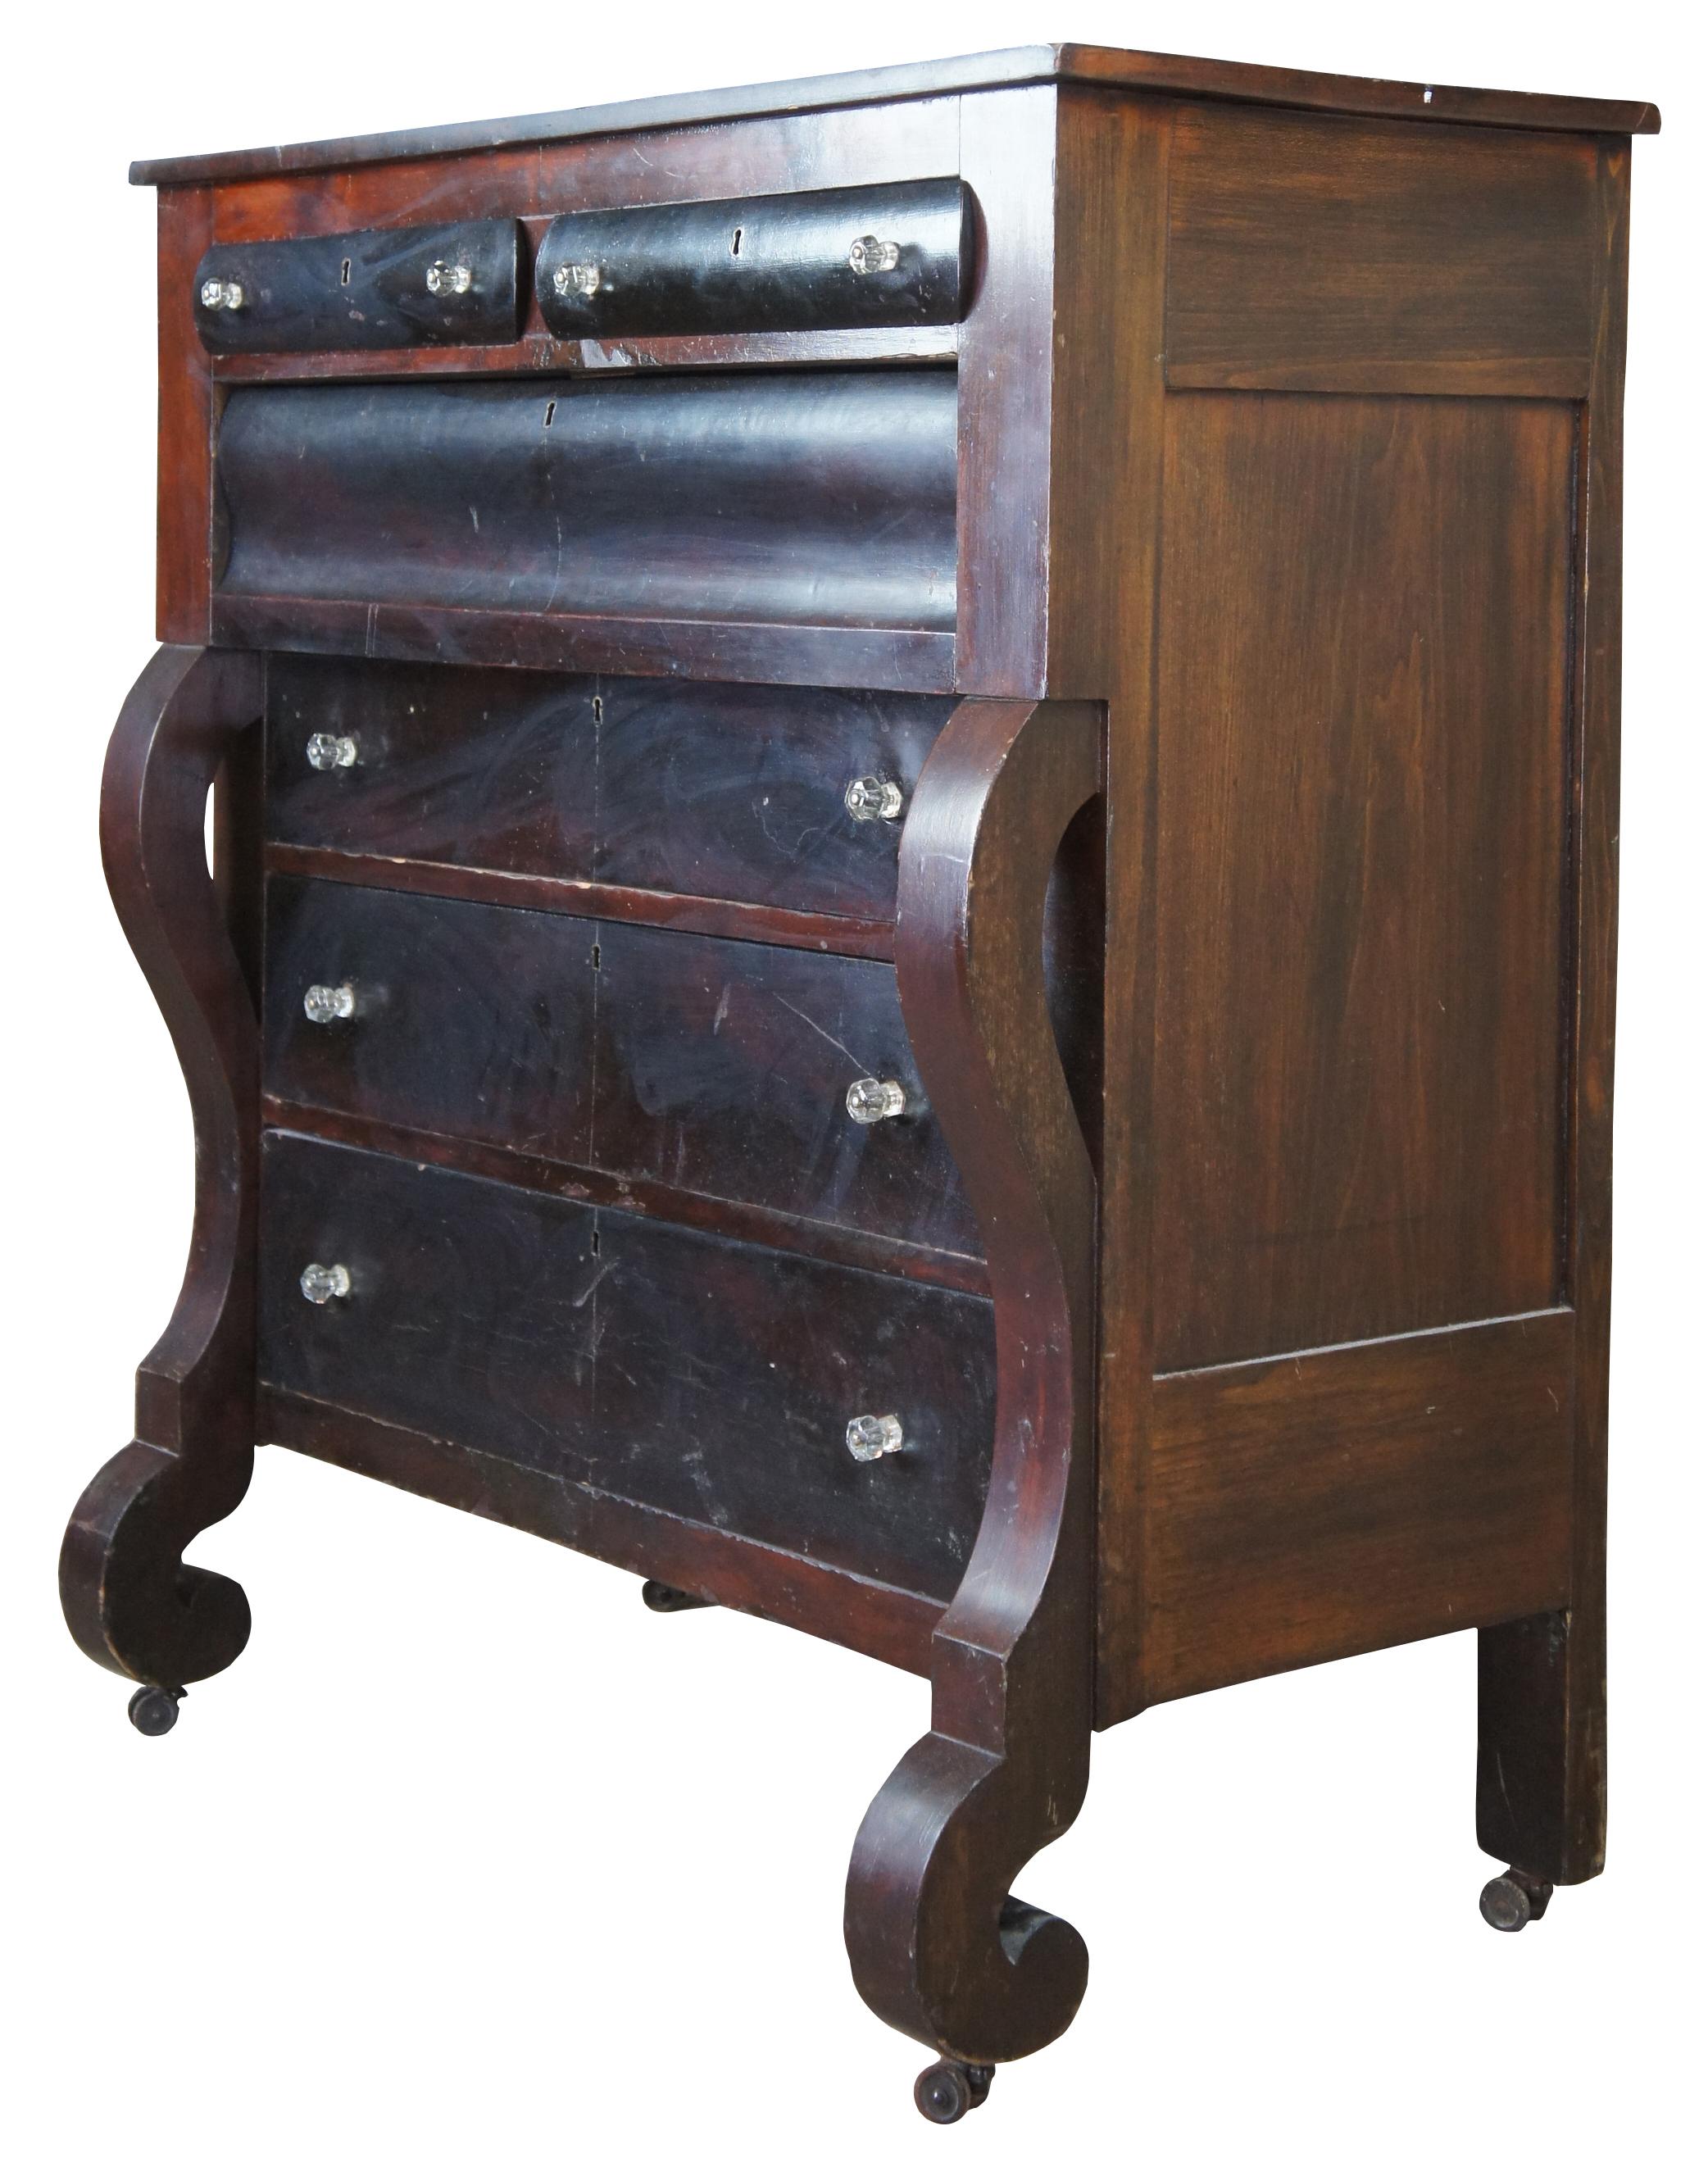 Mid 19th century American Empire tall boy chest. Features a rectangular form with scrolled front. Made from walnut with 6 drawers, glass knobs and double casters. 

Surface dimensions - 21